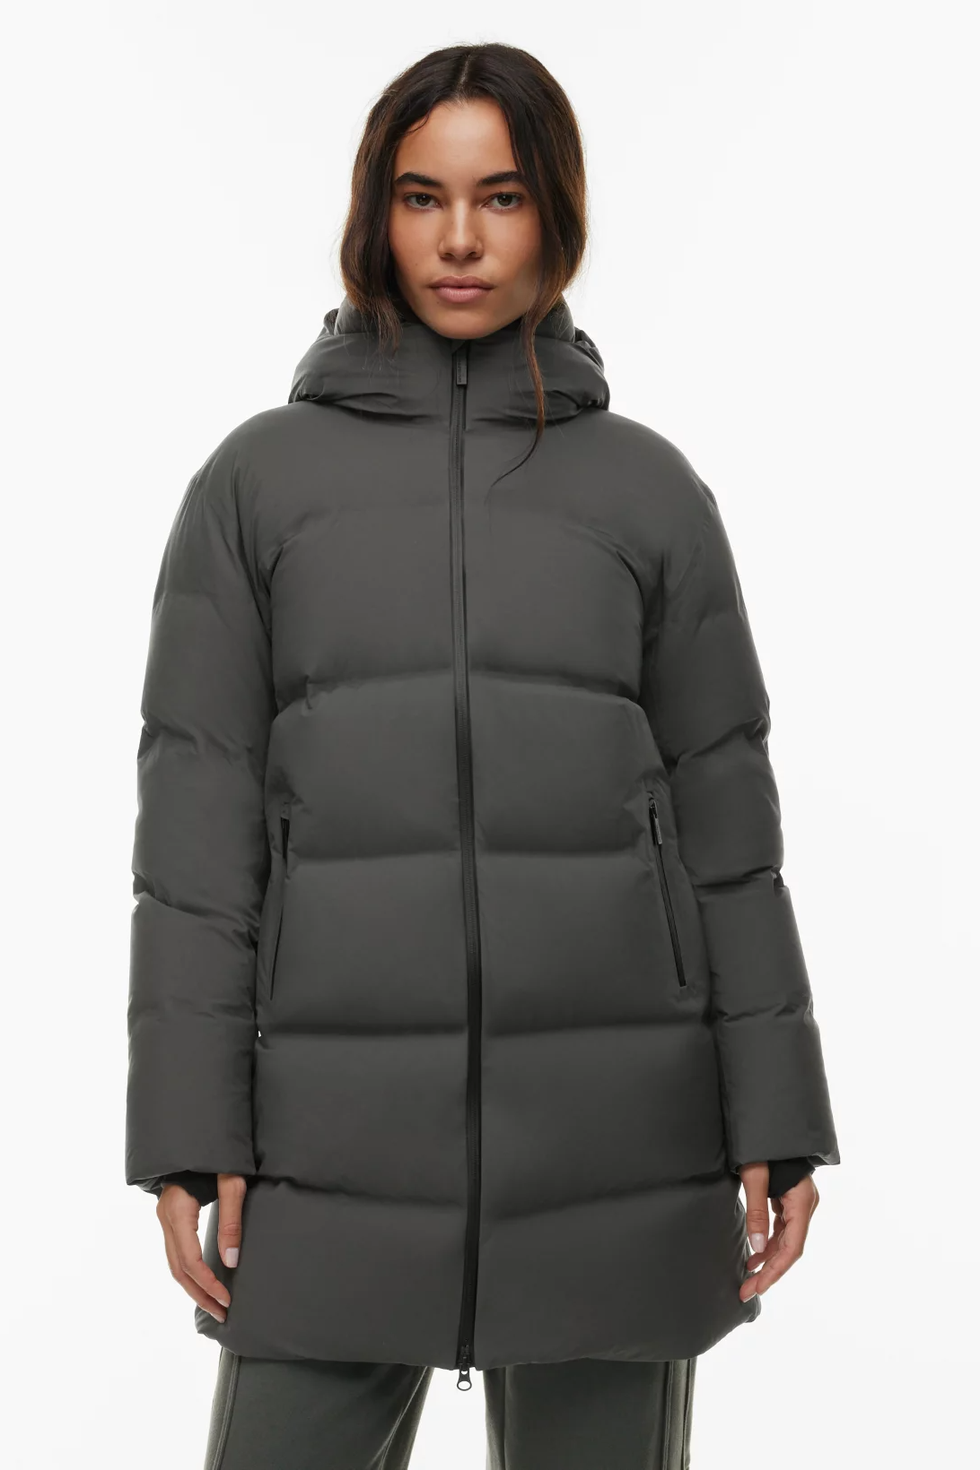 THE SUPER PUFF™  Puffer jacket style, Stylish clothes for women, Super puff